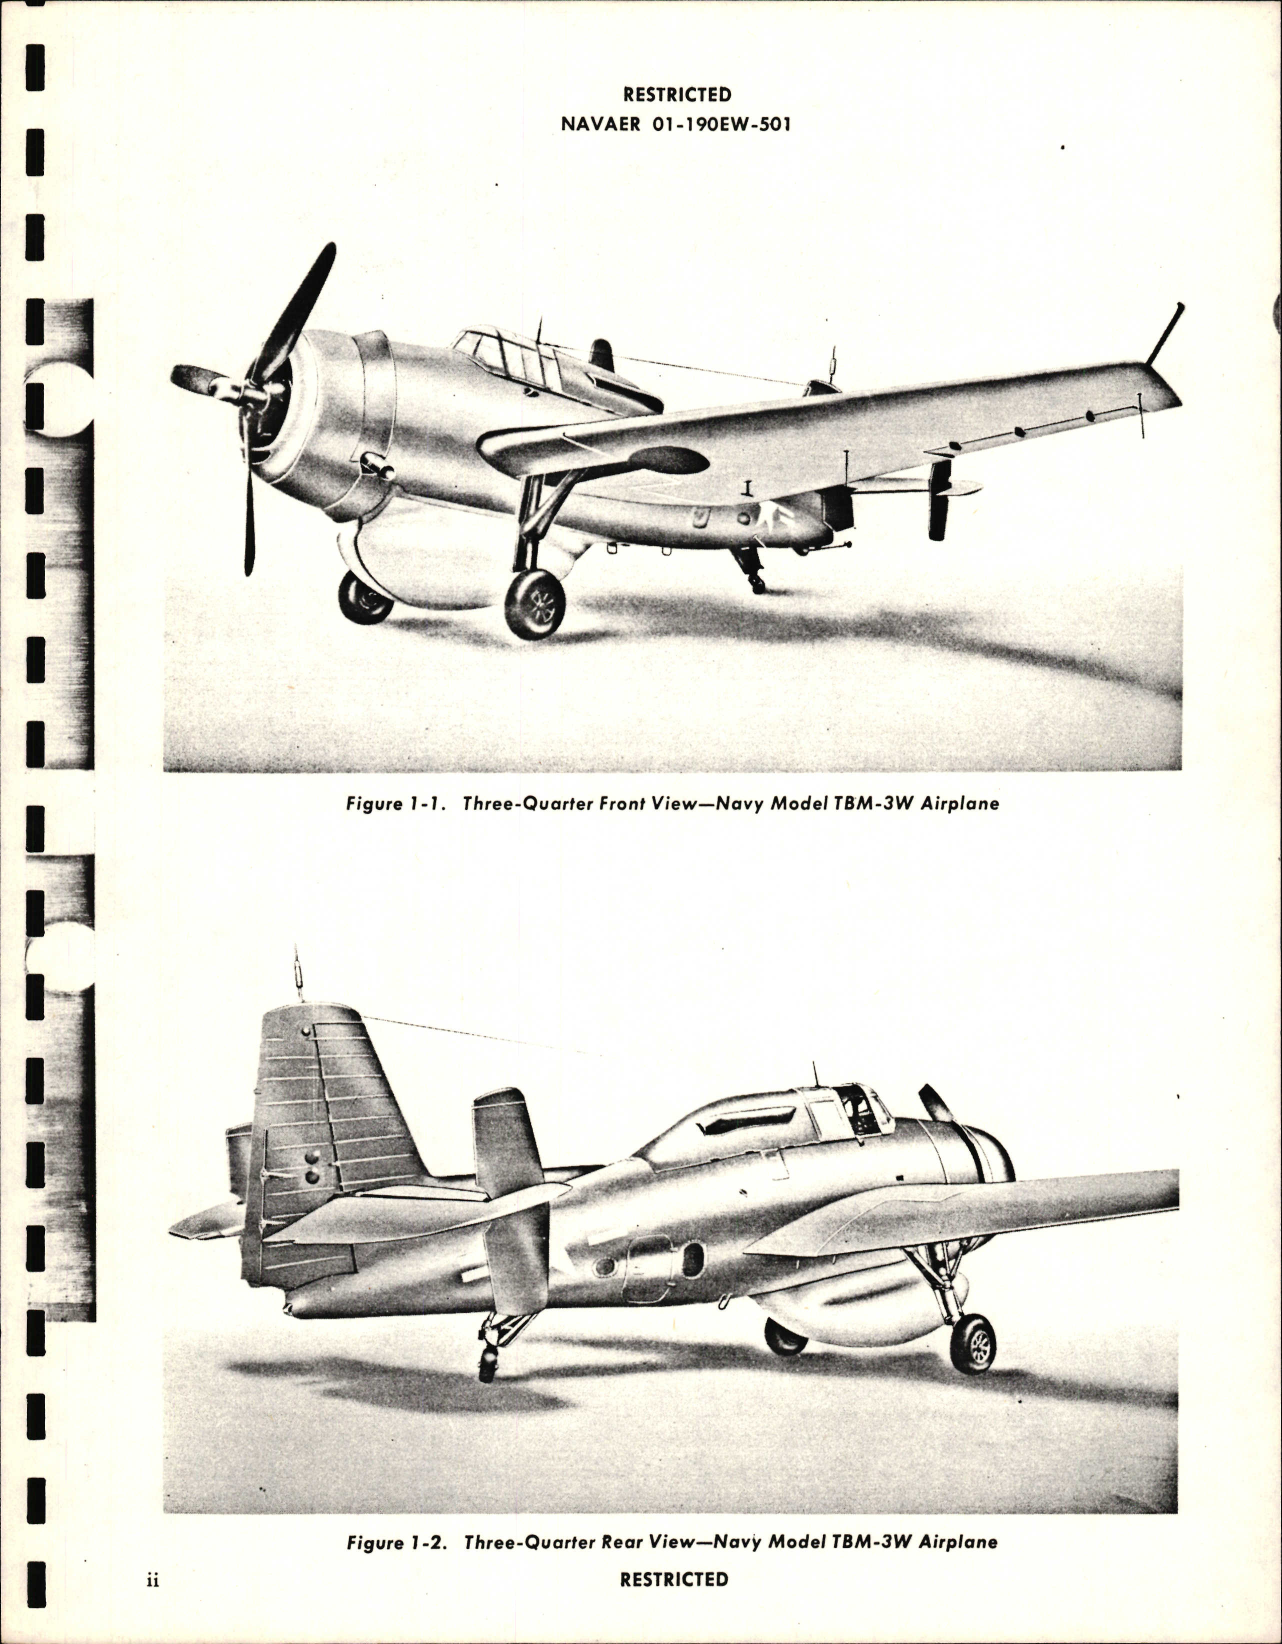 Sample page 3 from AirCorps Library document: Handbook of Instructions with Parts Catalog for TBM-3W